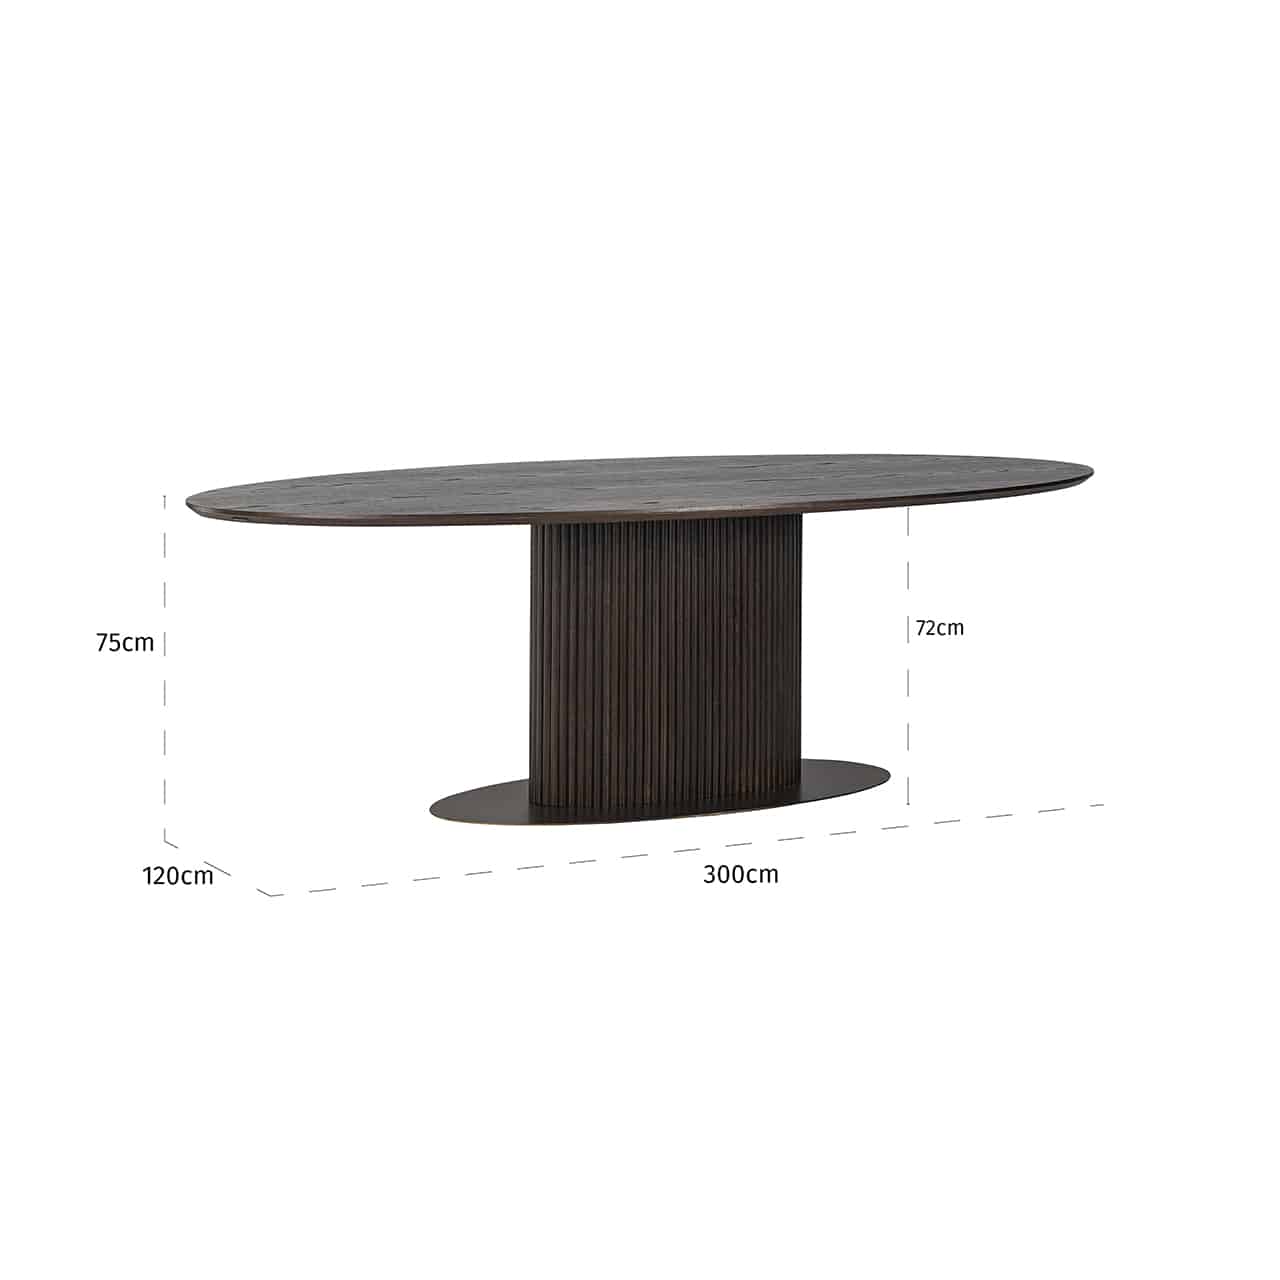 Dining table Luxor oval 3007756richmond